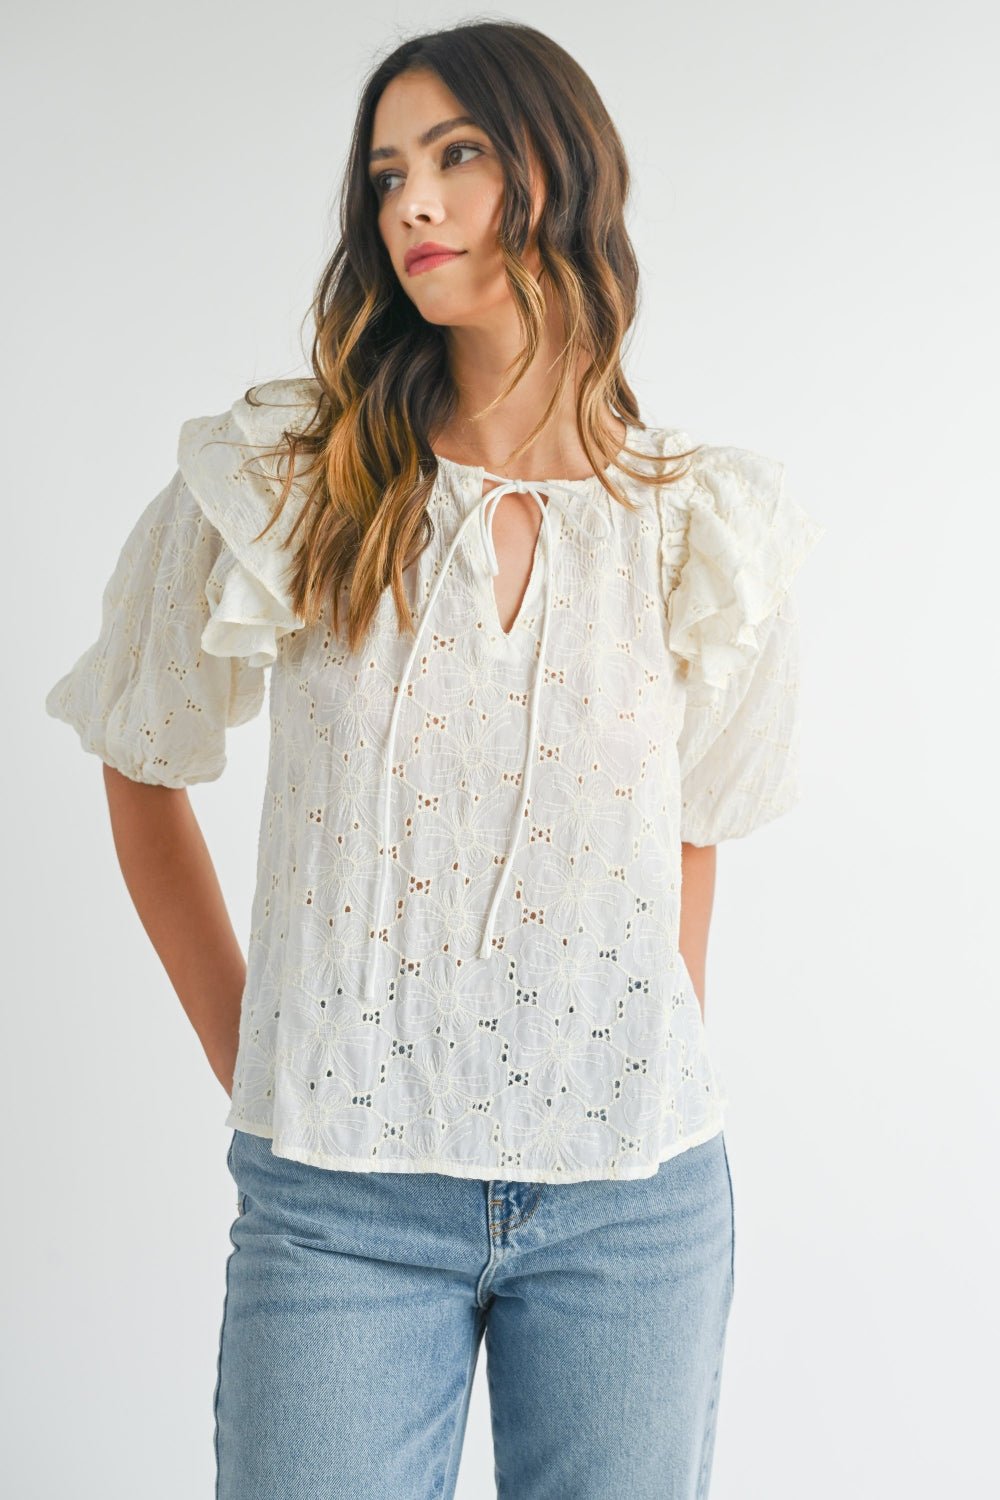 Eyelet Lace Ruffled Puff Sleeve Blouse in CreamBlouseMable